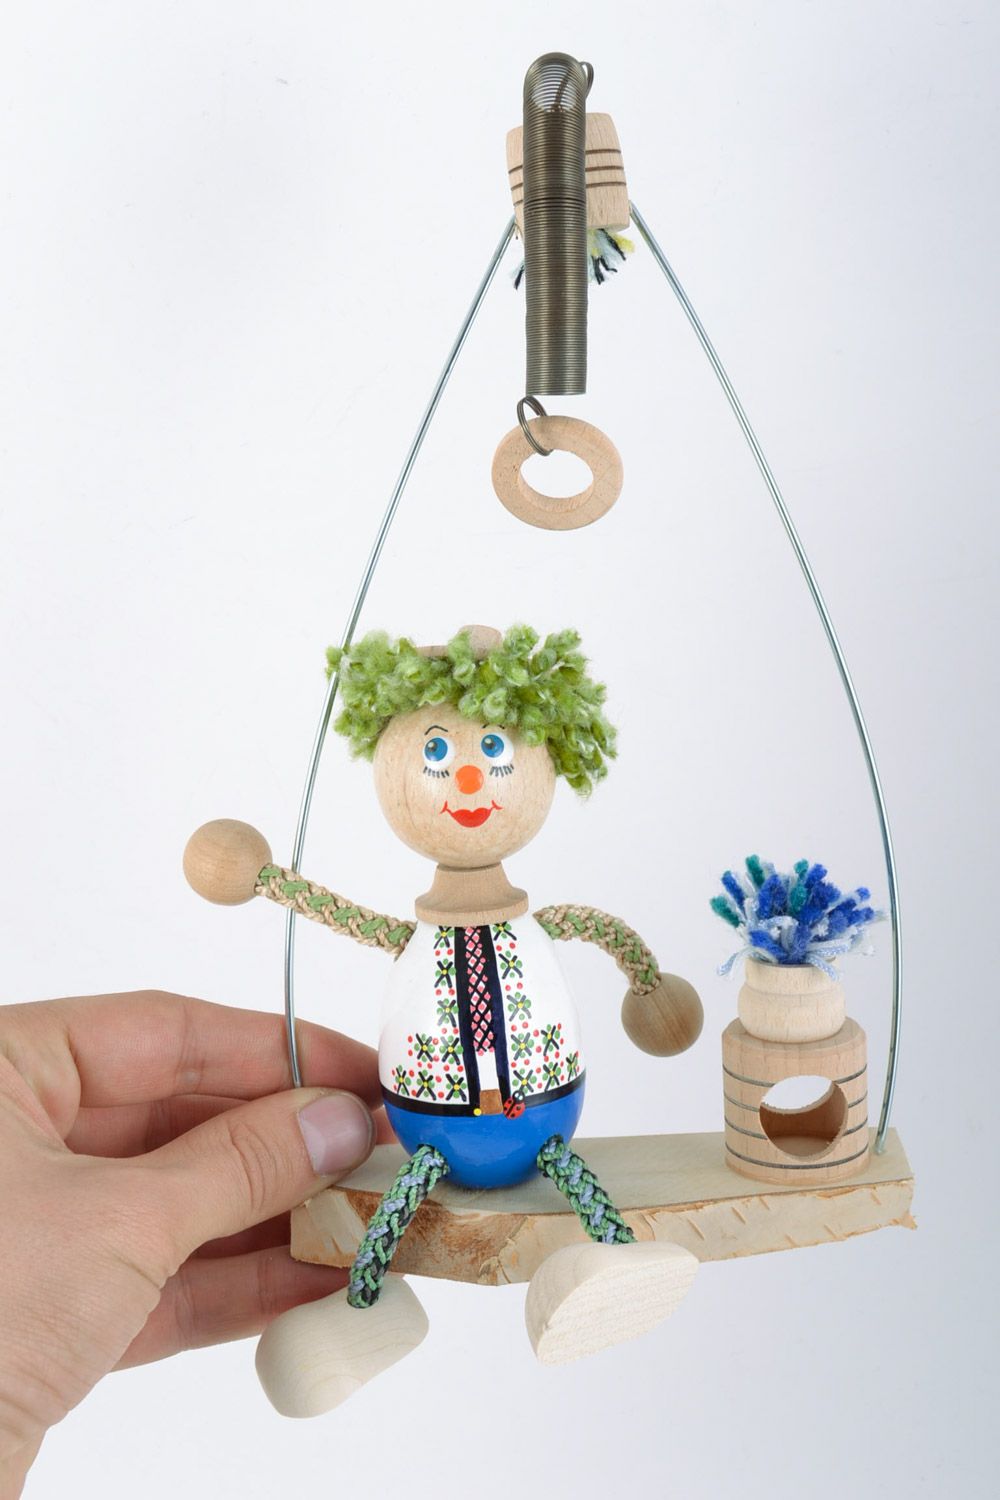 Homemade painted wooden eco toy in the shape of boy on swing for children photo 2